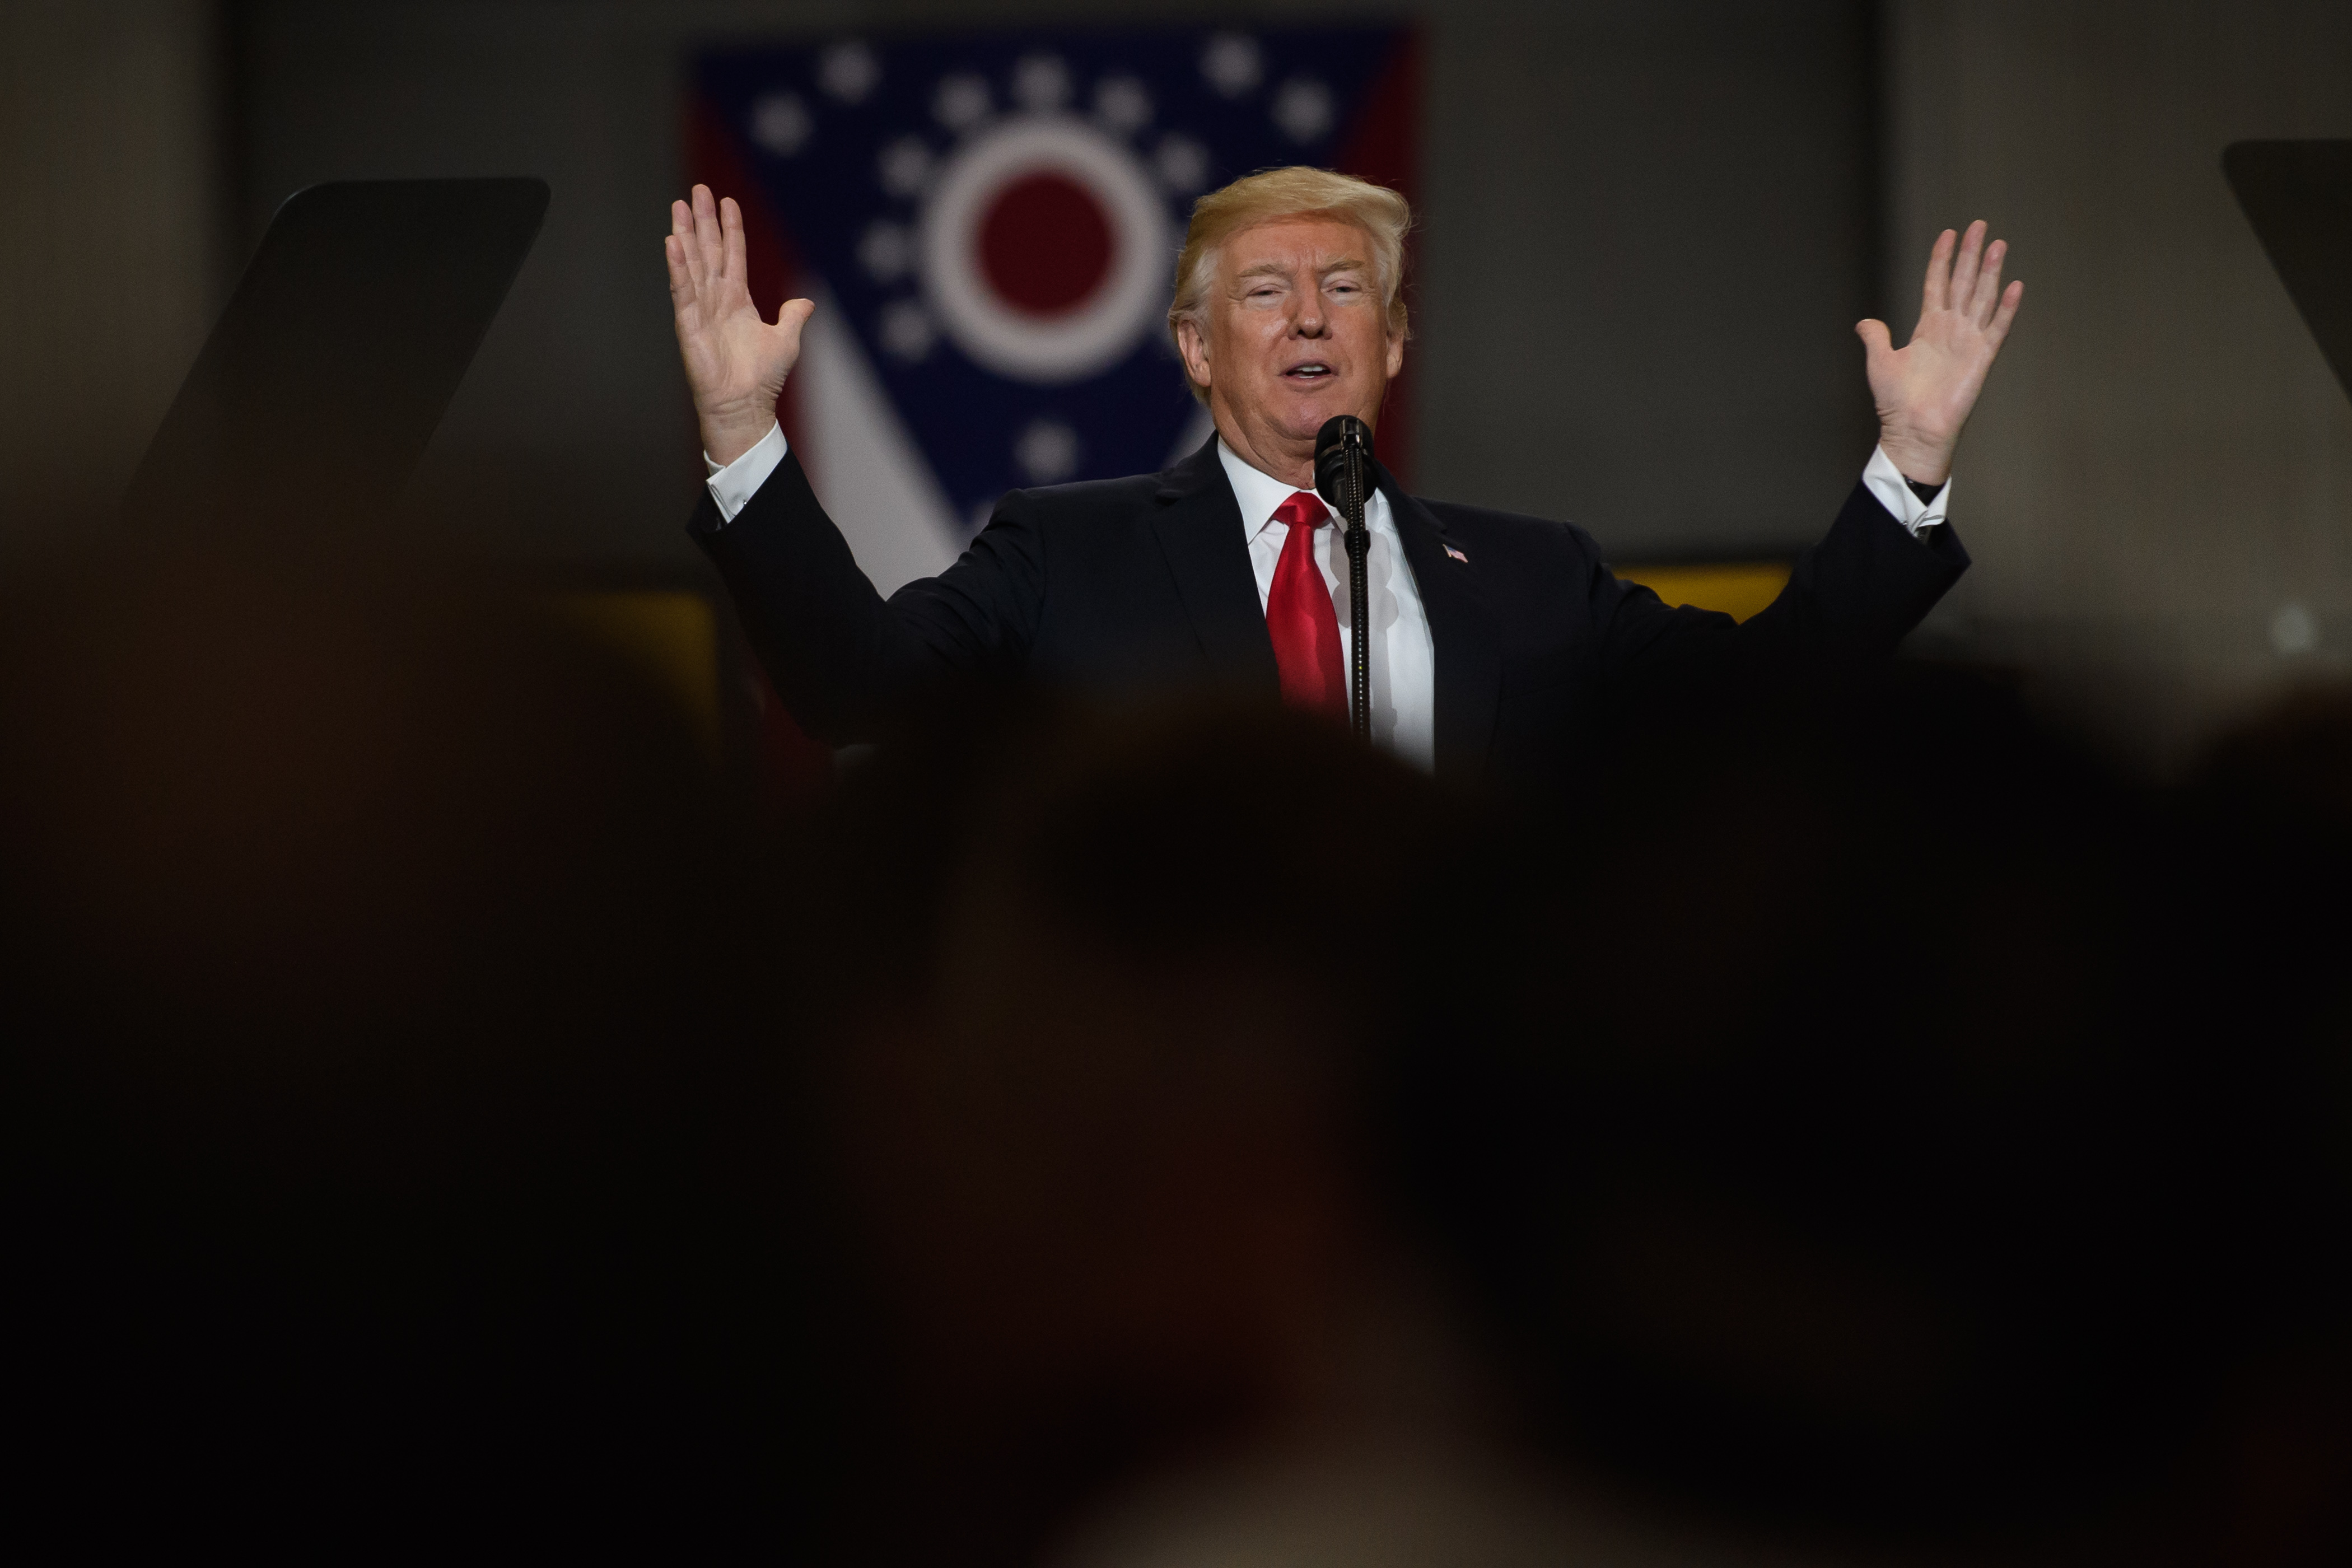 RICHFIELD, OHIO - MARCH 29: U.S. President Donald Trump speaks to a crowd gathered at the Local 18 Richfield Facility of the Operating Engineers Apprentice and Training, a union and apprentice training center specializing in the repair and operation of heavy equipment on March 29, 2018 in Richfield, Ohio. President Trump's remarks centered upon infrastructure investment in the economy and labor statistics. (Photo by Jeff Swensen/Getty Images)